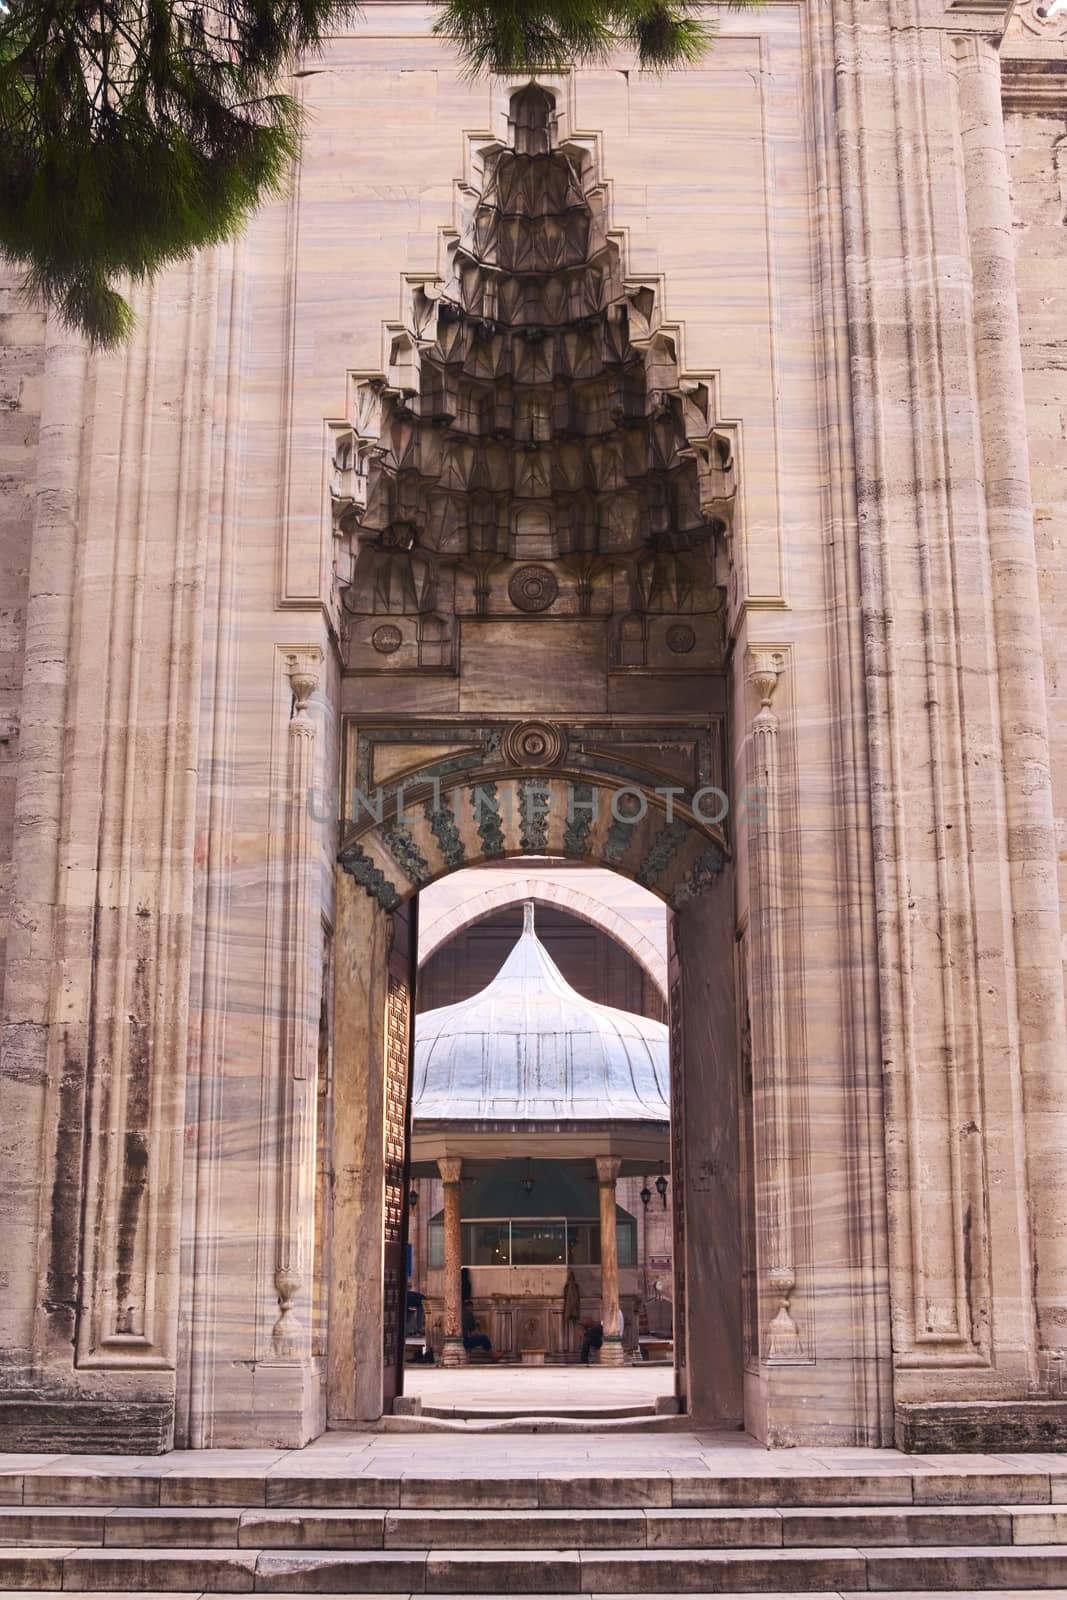 Entrance gate of the Sehzade Mosque in Istanbul, Turkey. Islamic art, architectural detail.